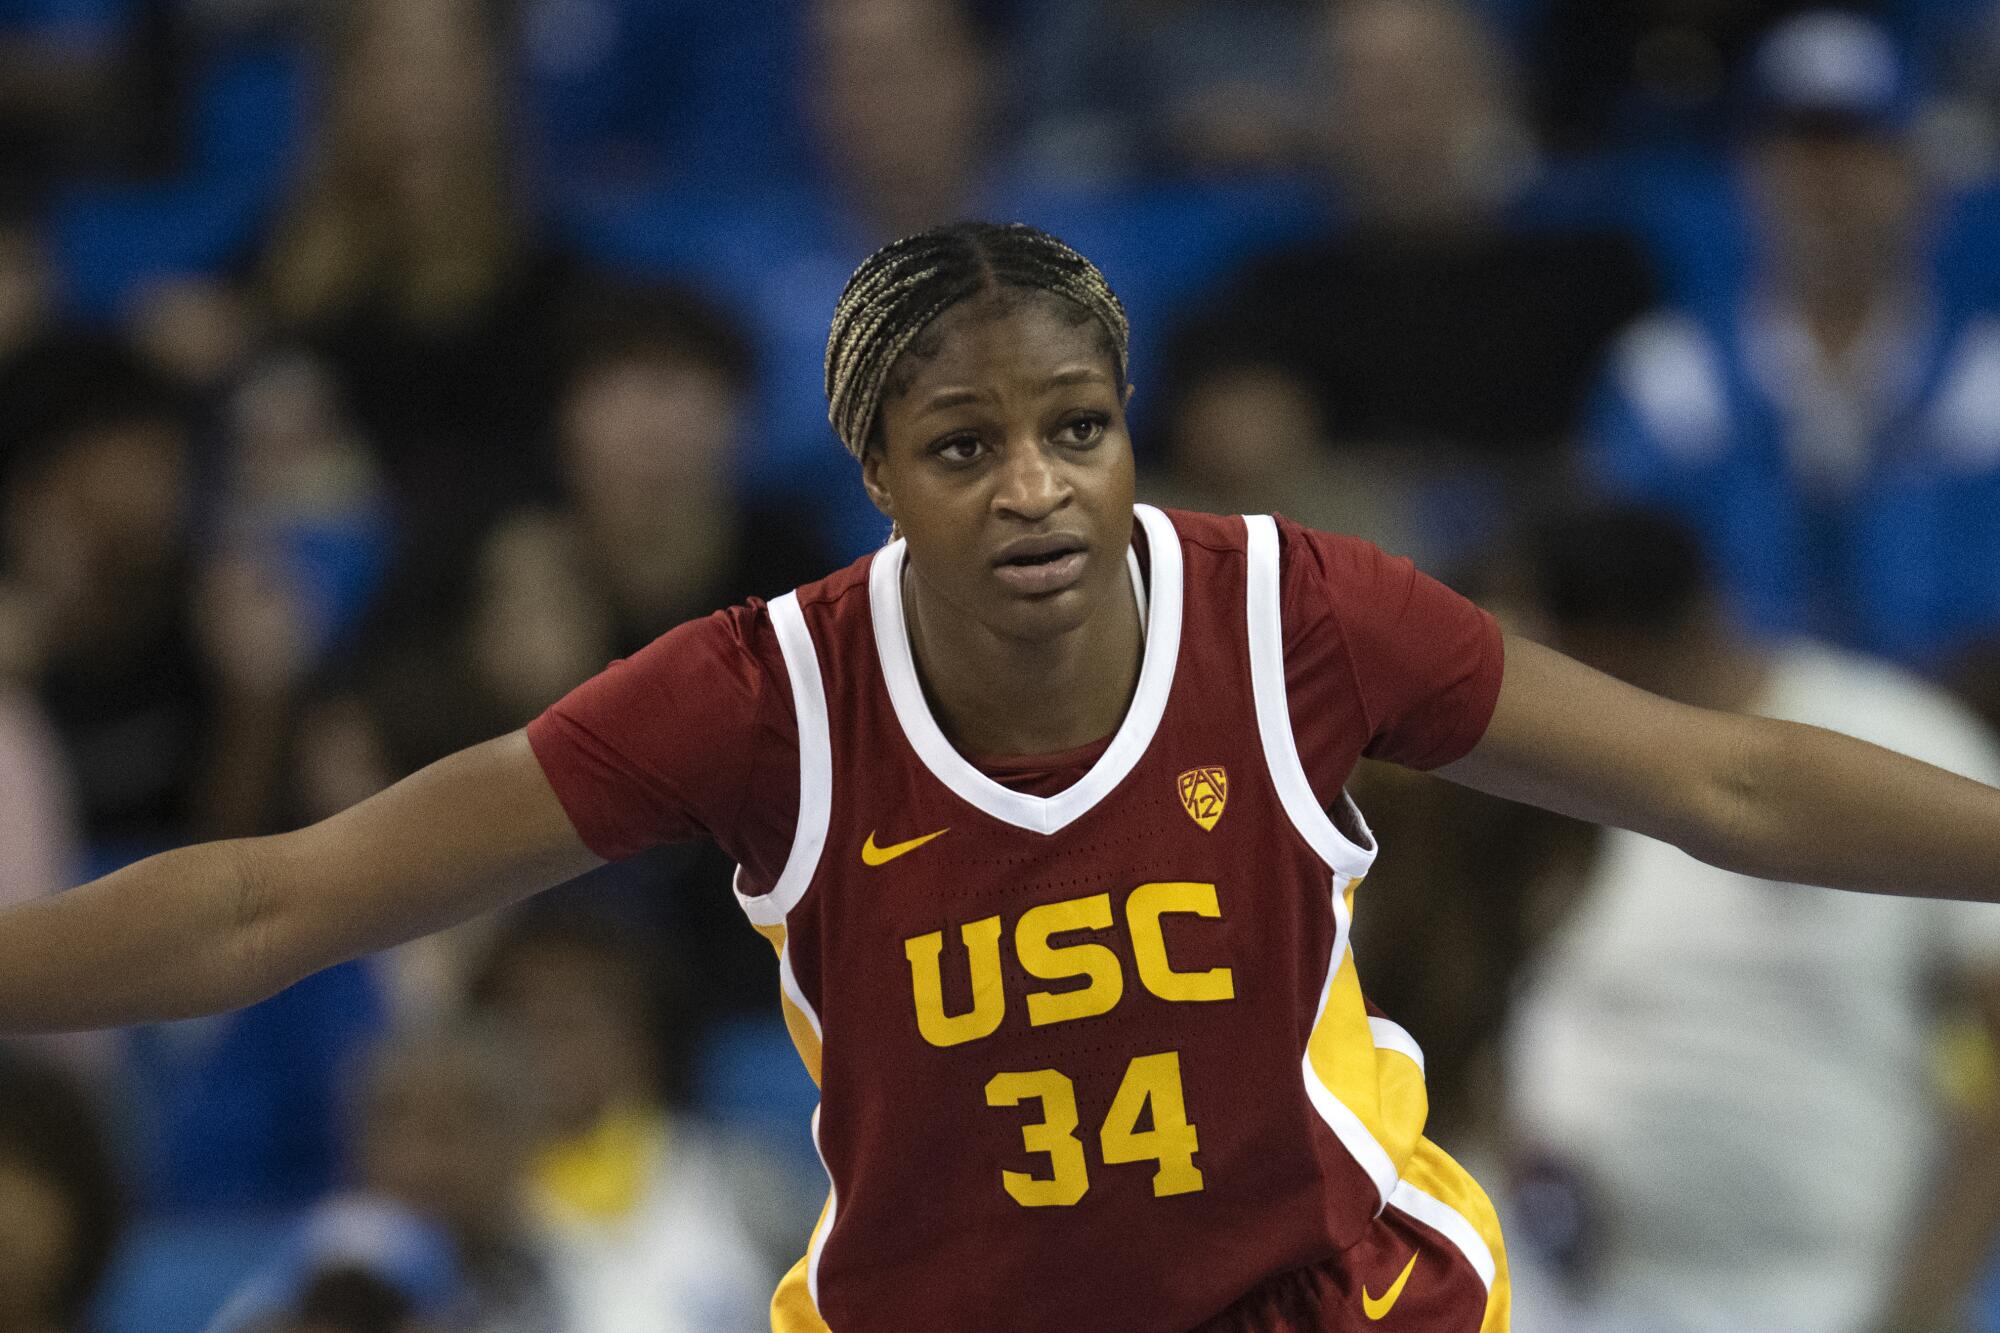 USC center Clarice Akunwafo gets down in a defensive stance.